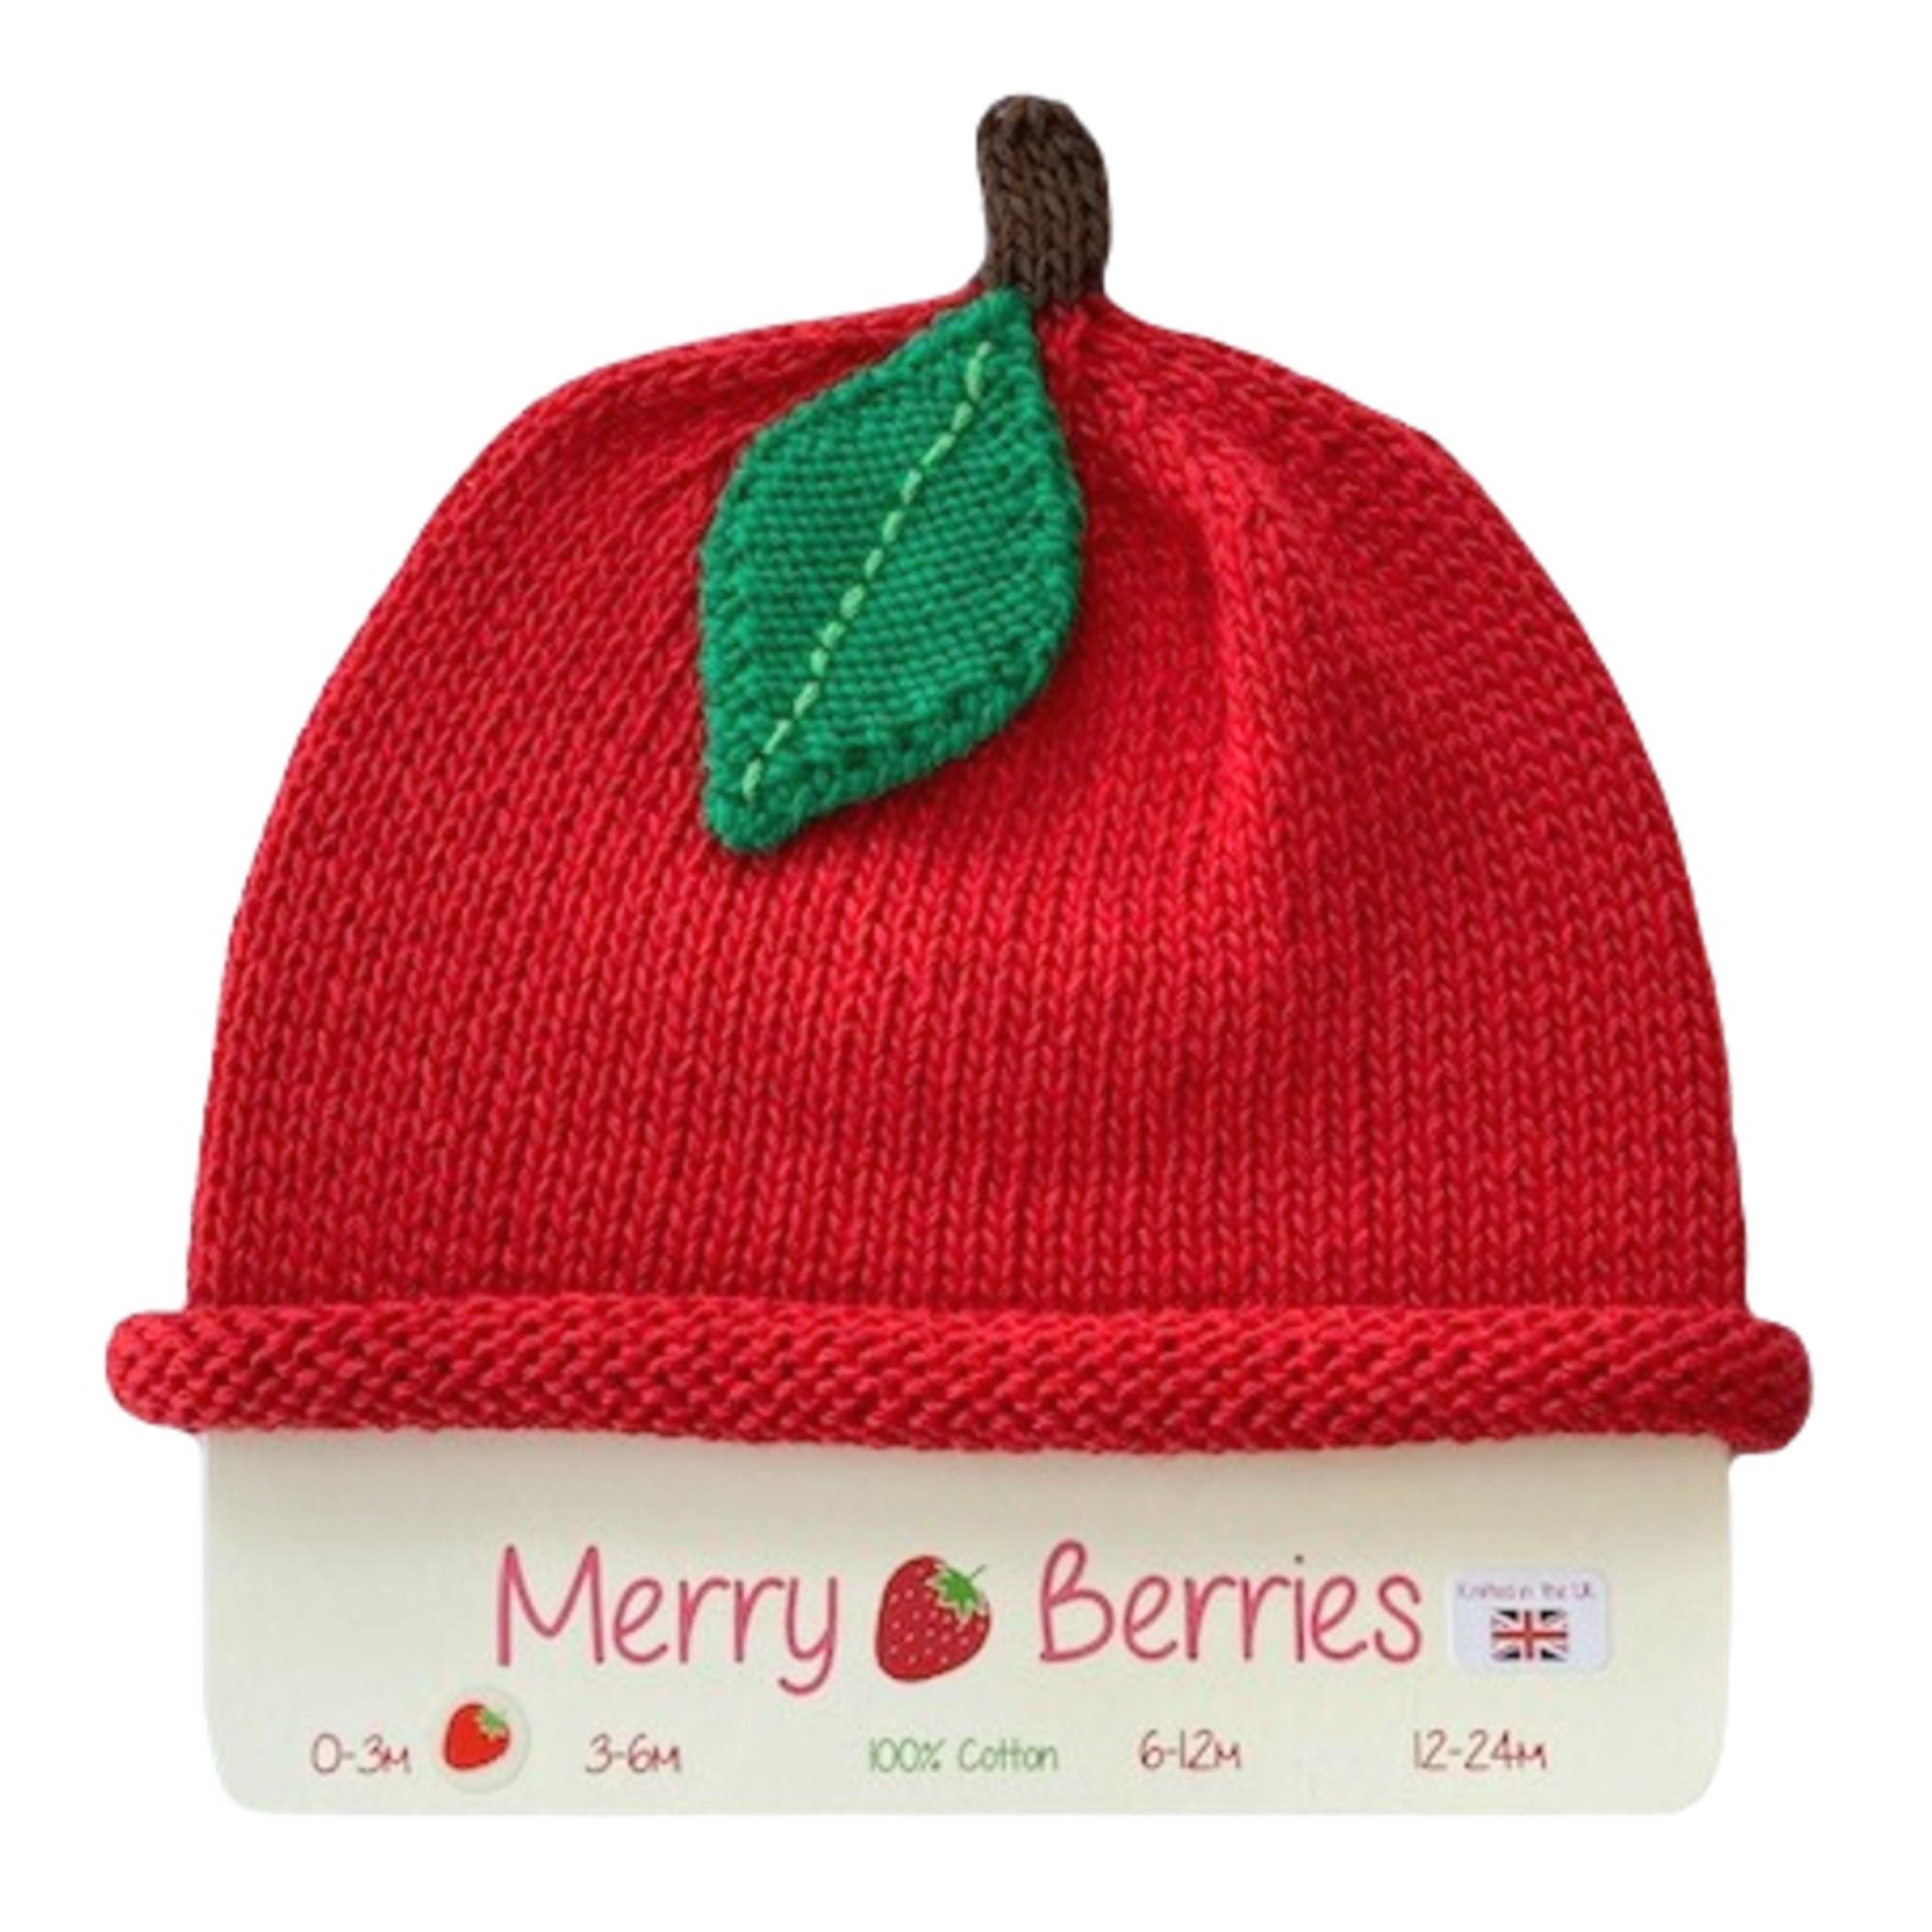 Merry Berries - Apple Knitted baby Hat-0-24mths-Cotton